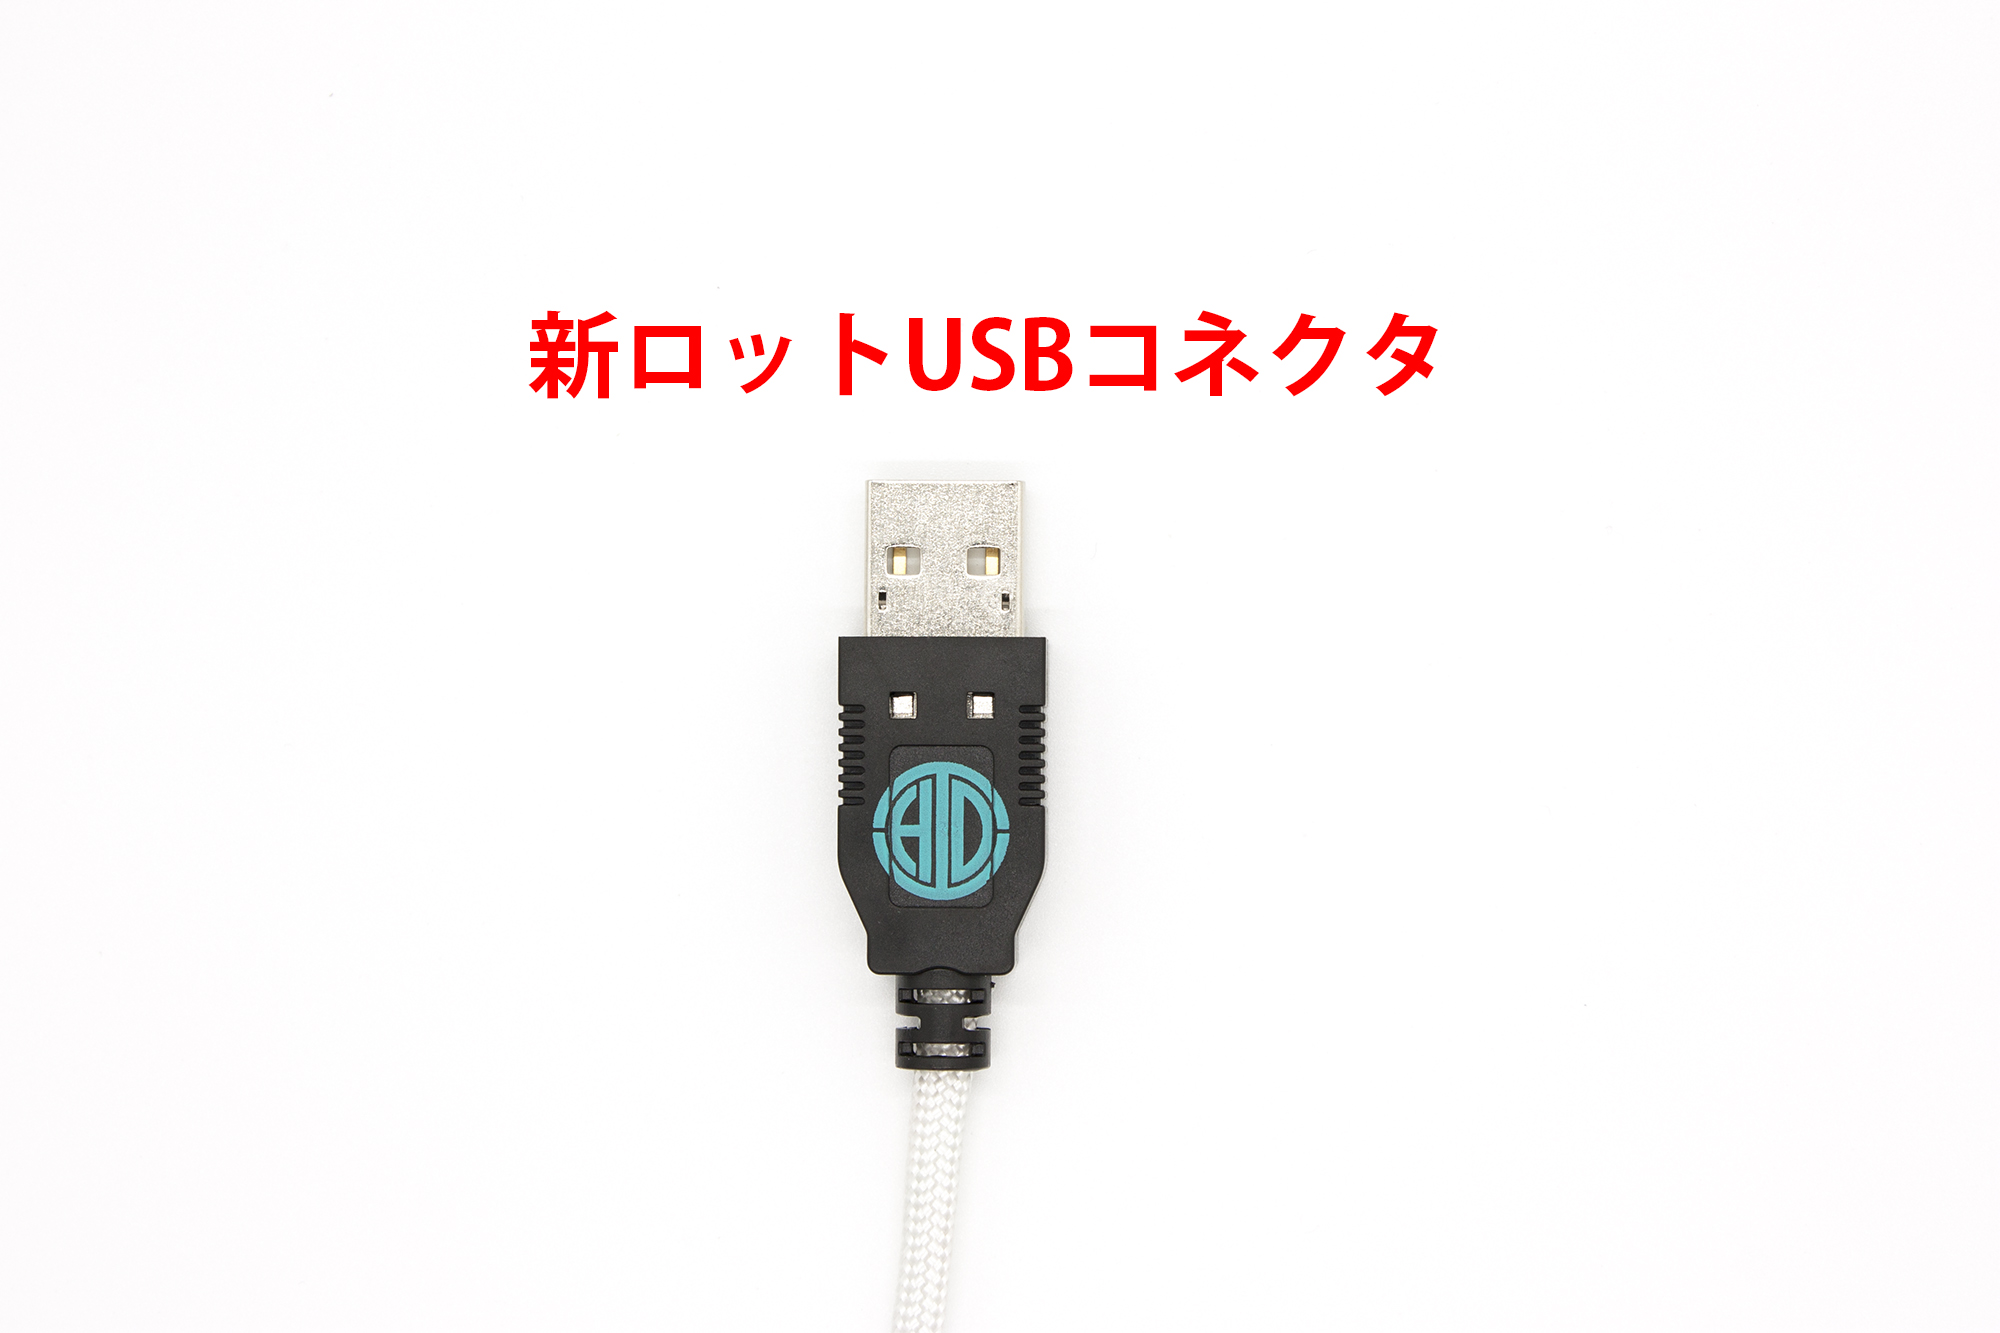 His labs silky cable phコネクタ